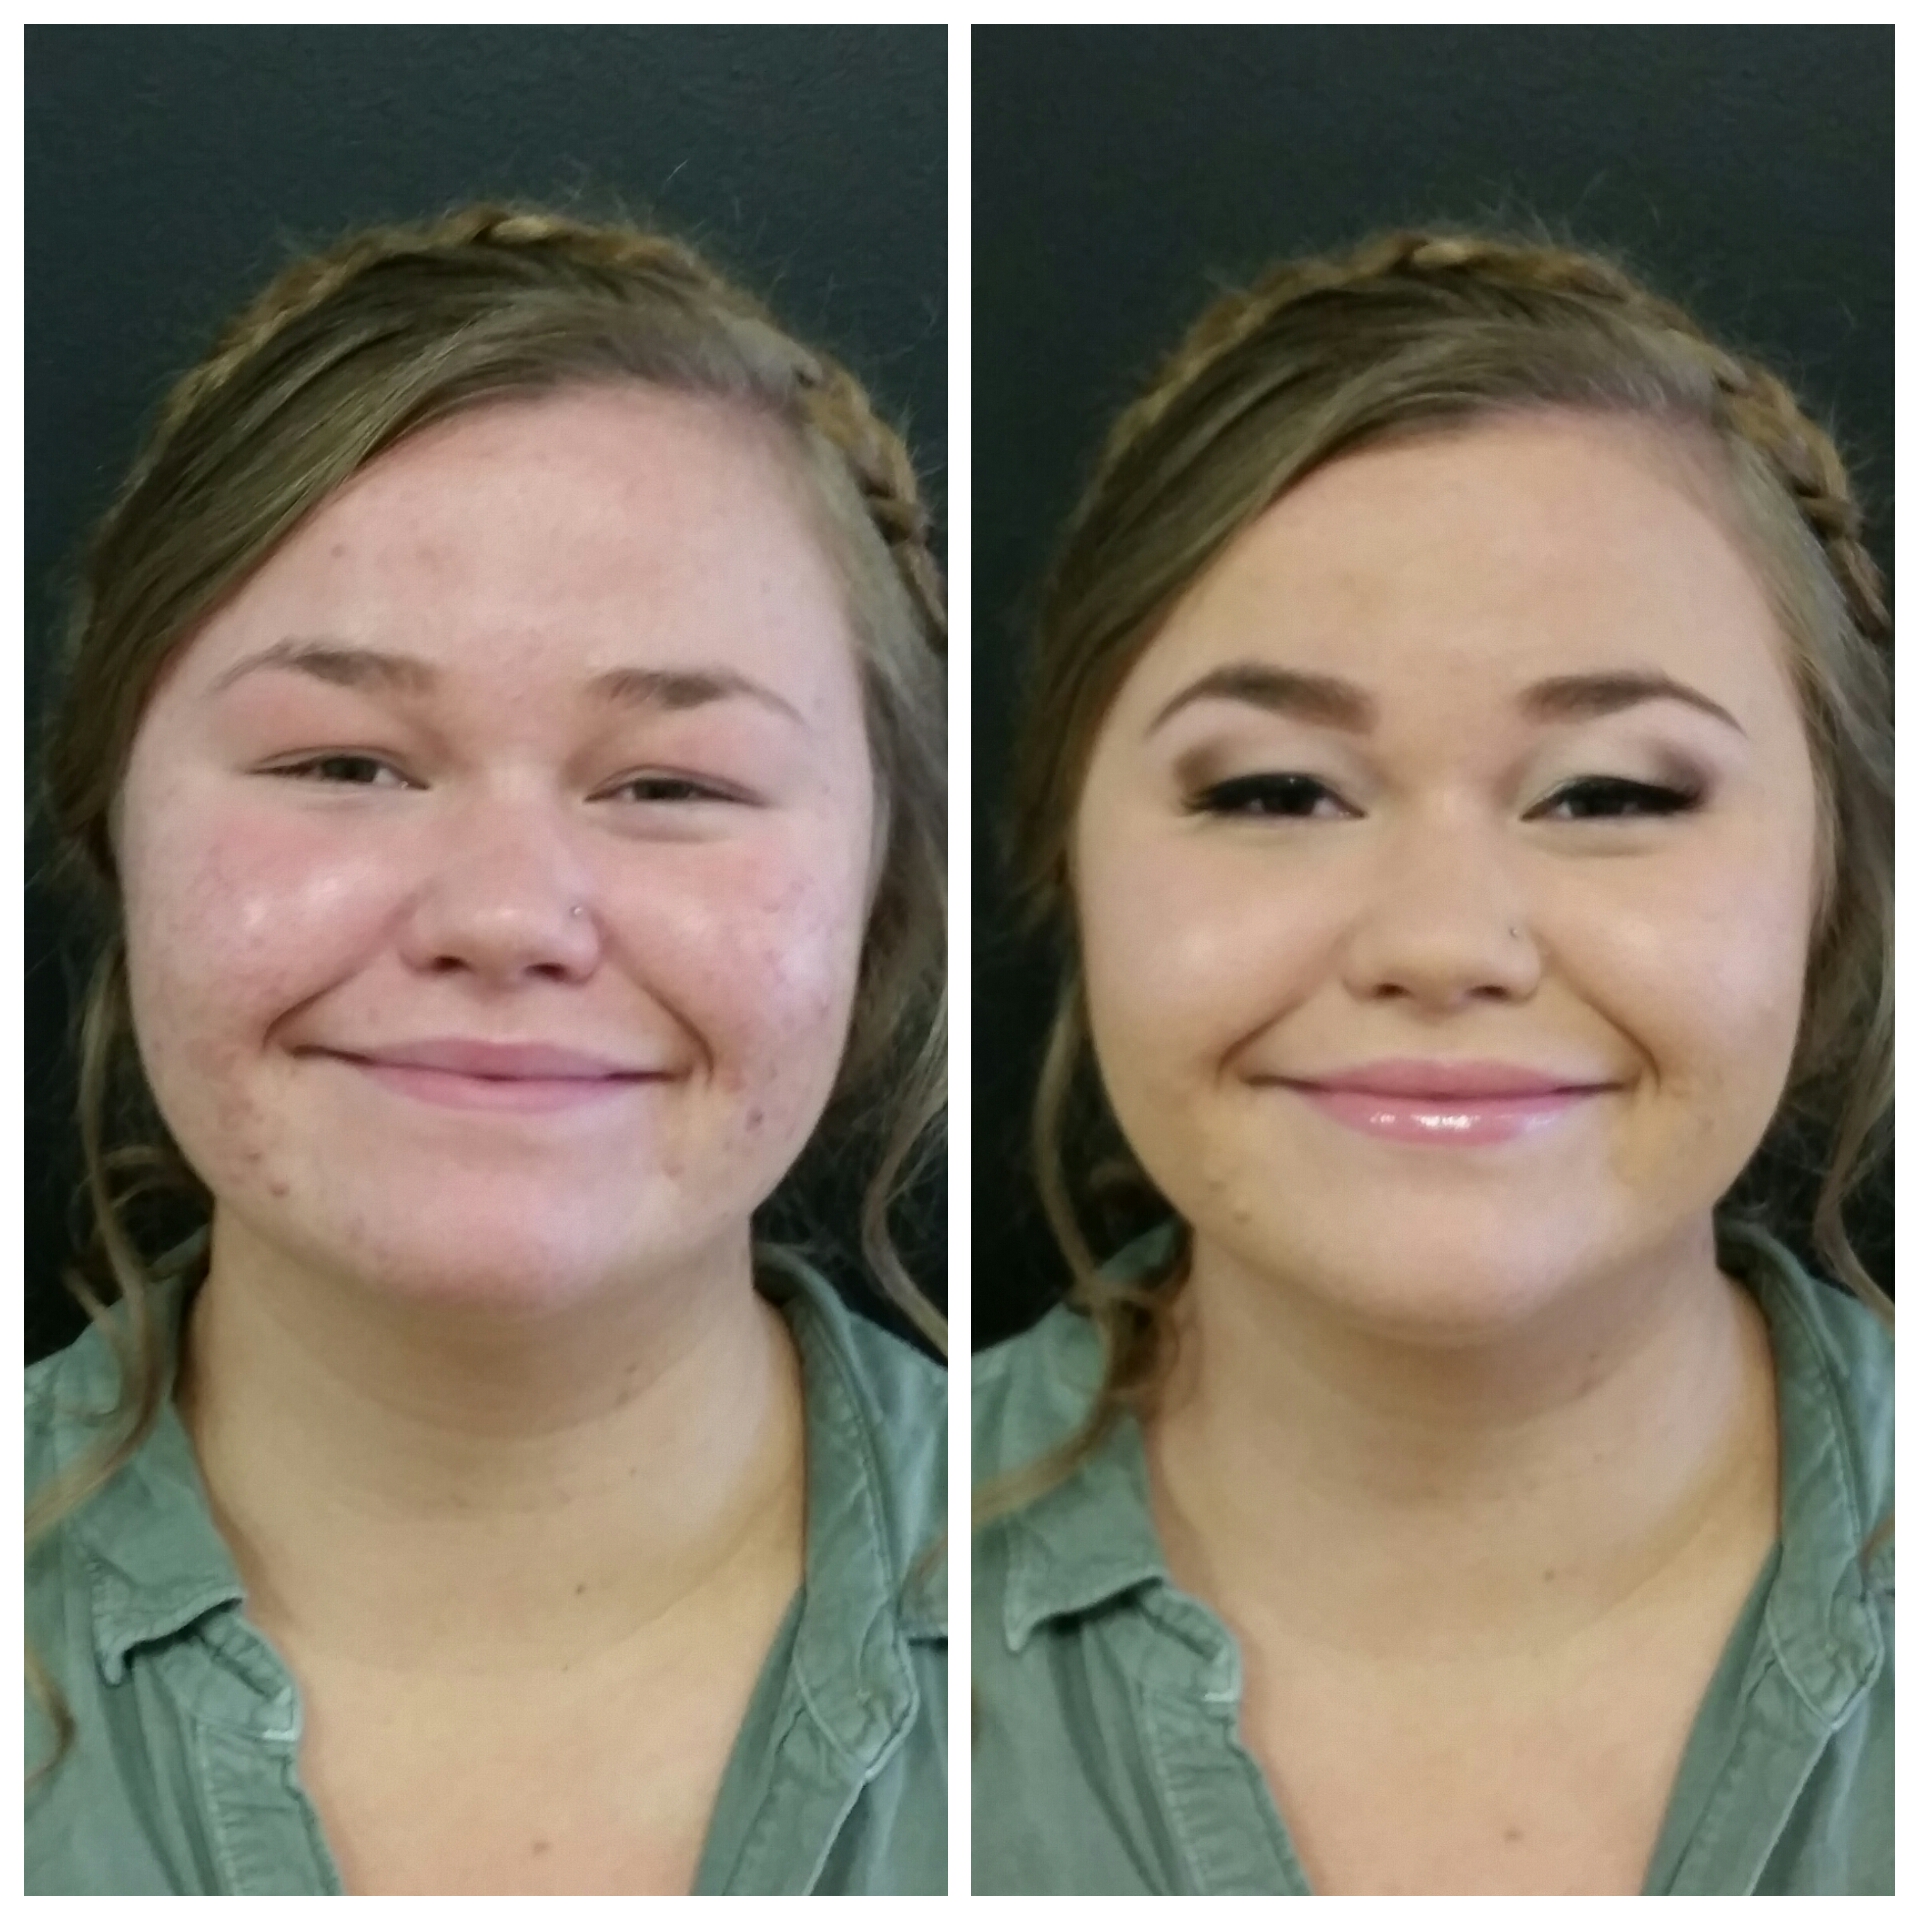 Prom Makeup with Lashes by Luminous Beauty Makeup Artist.jpg